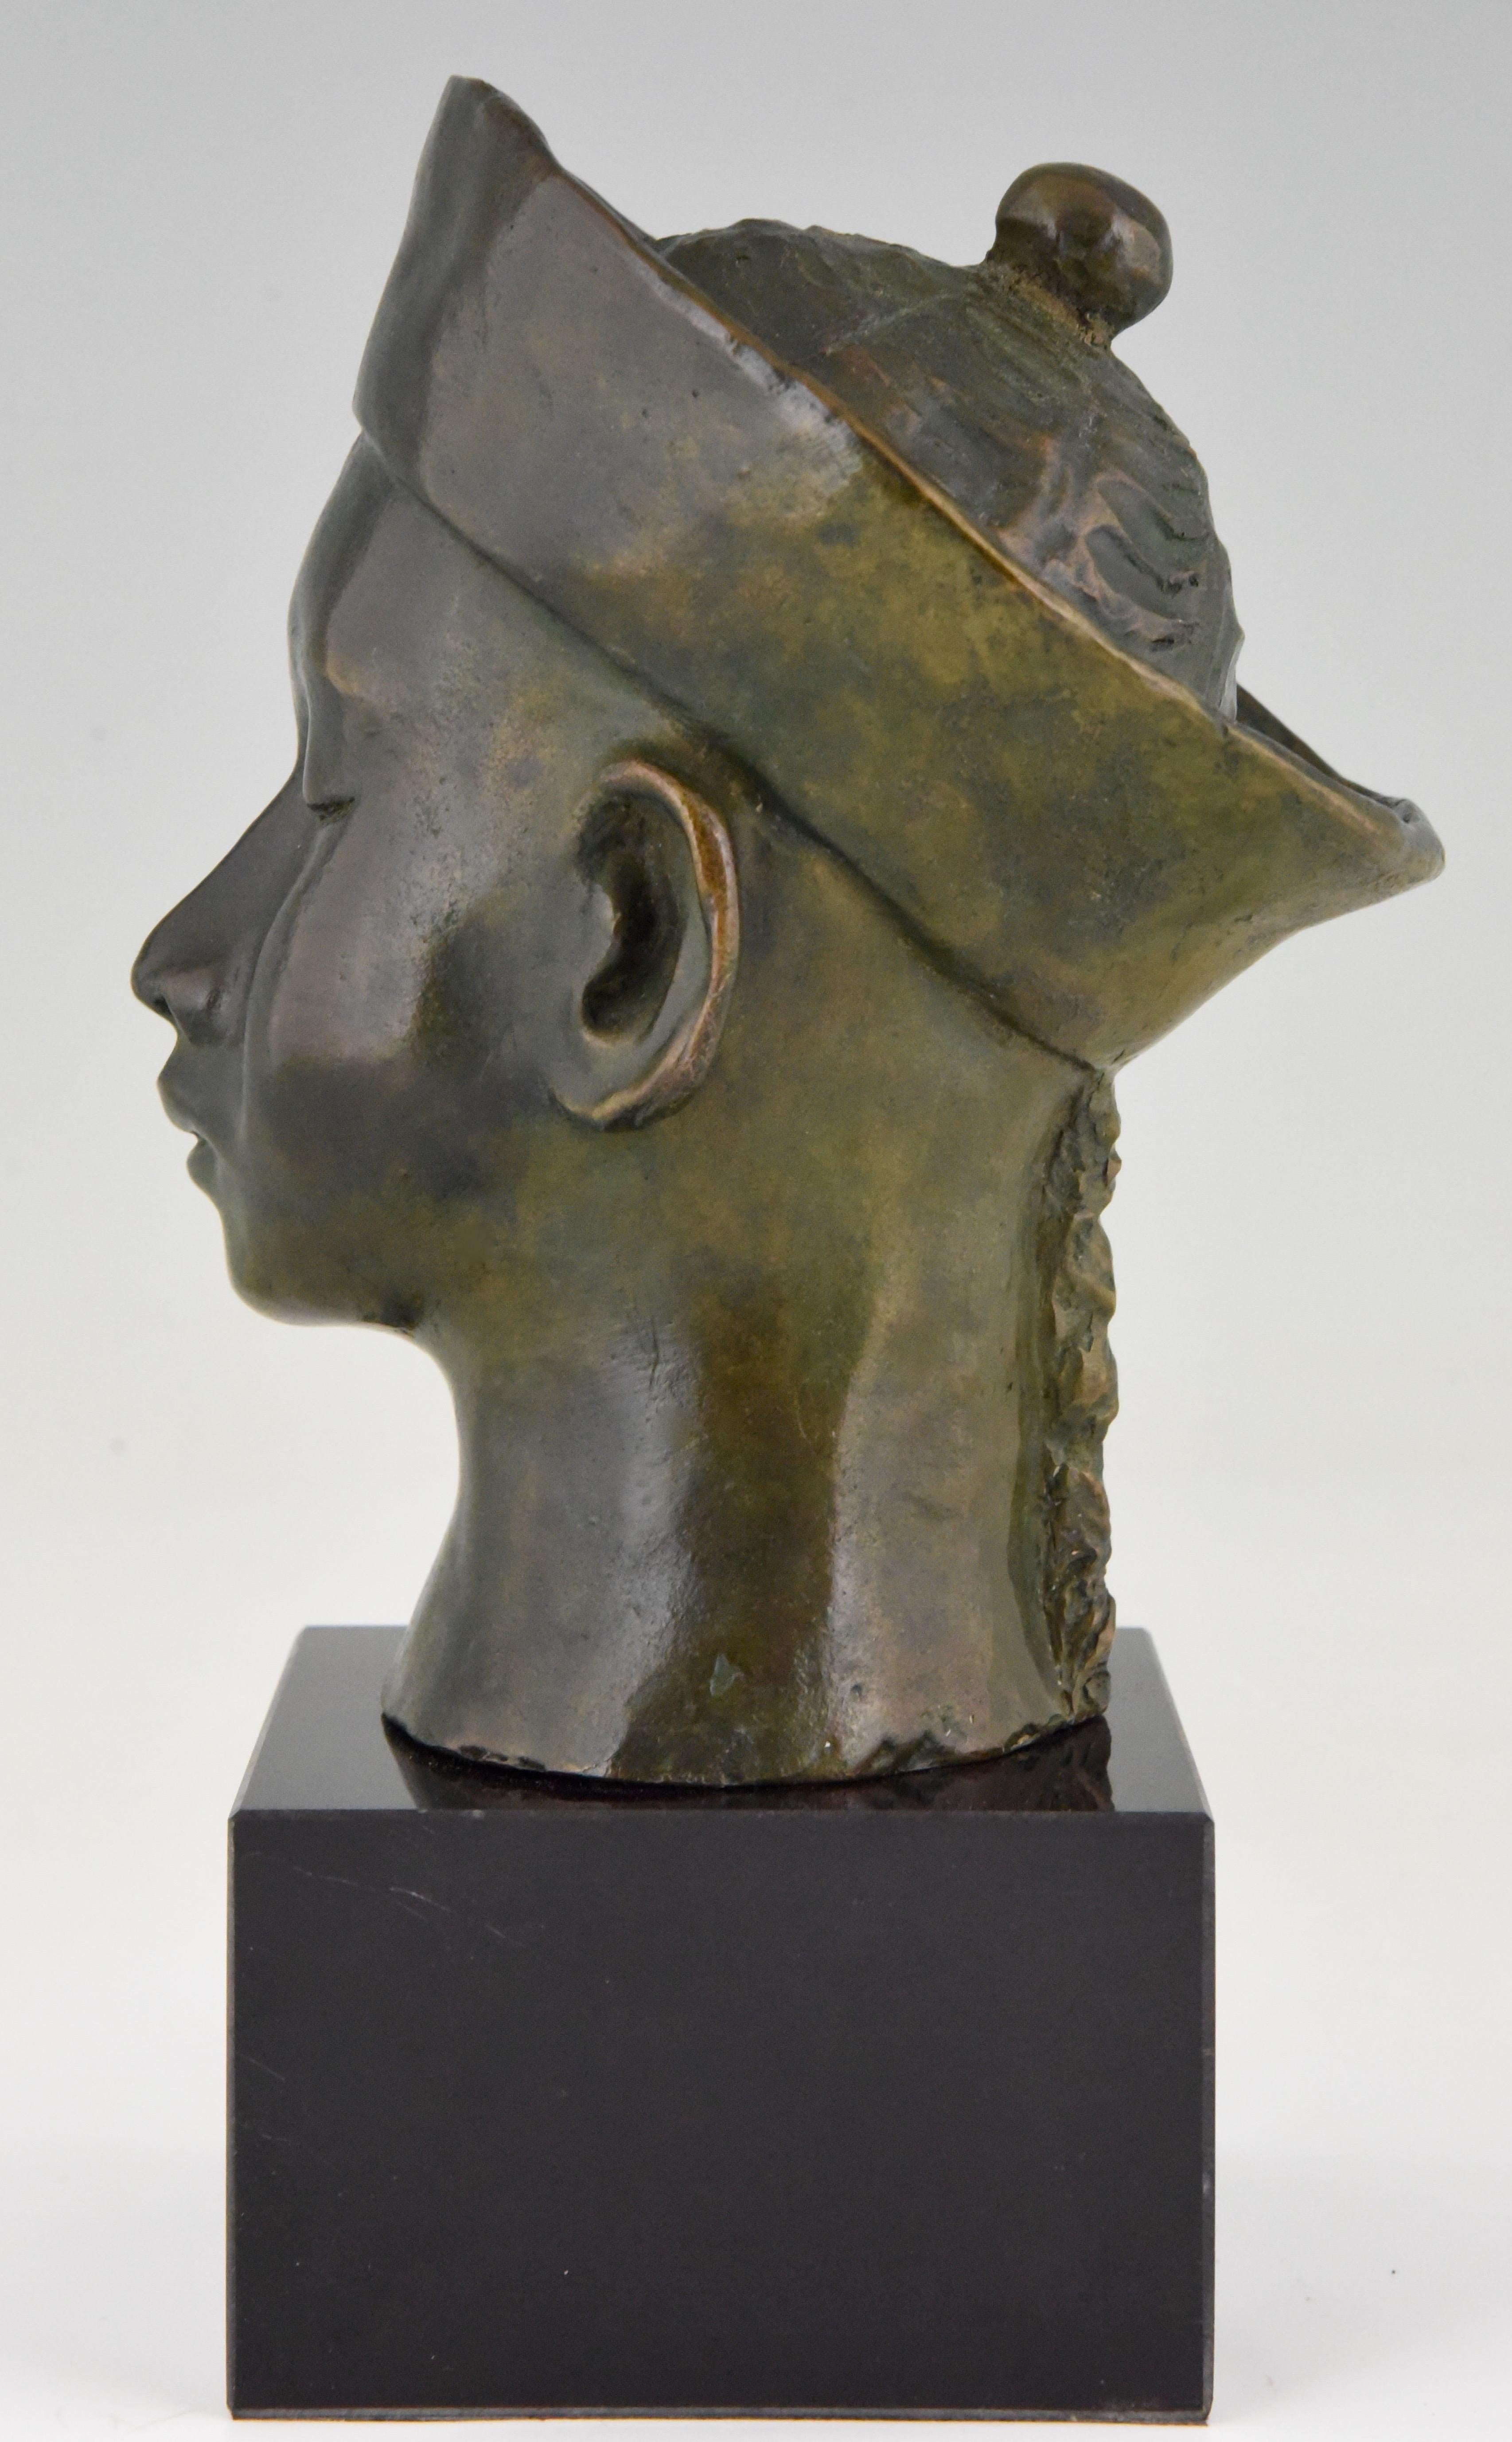 French Art Deco Bronze Bust Chinese Boy with Hat and Braid. C. Le Van  1930